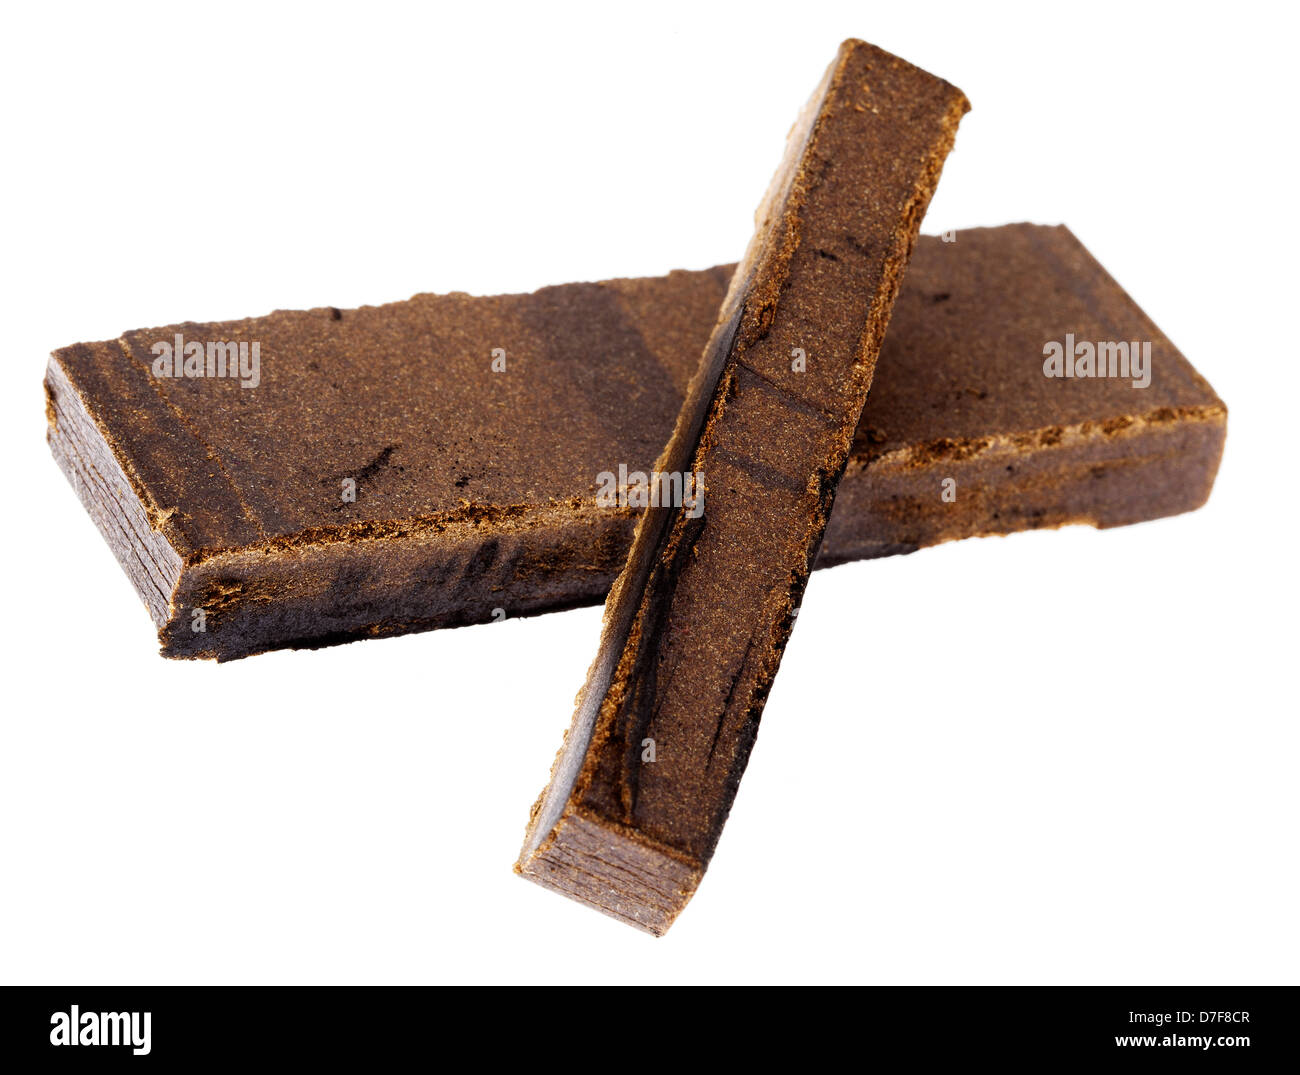 A 10 grams piece Hashish laid on top 20 grams piece isolated on white background. This pieces represent quantity three retail Stock Photo